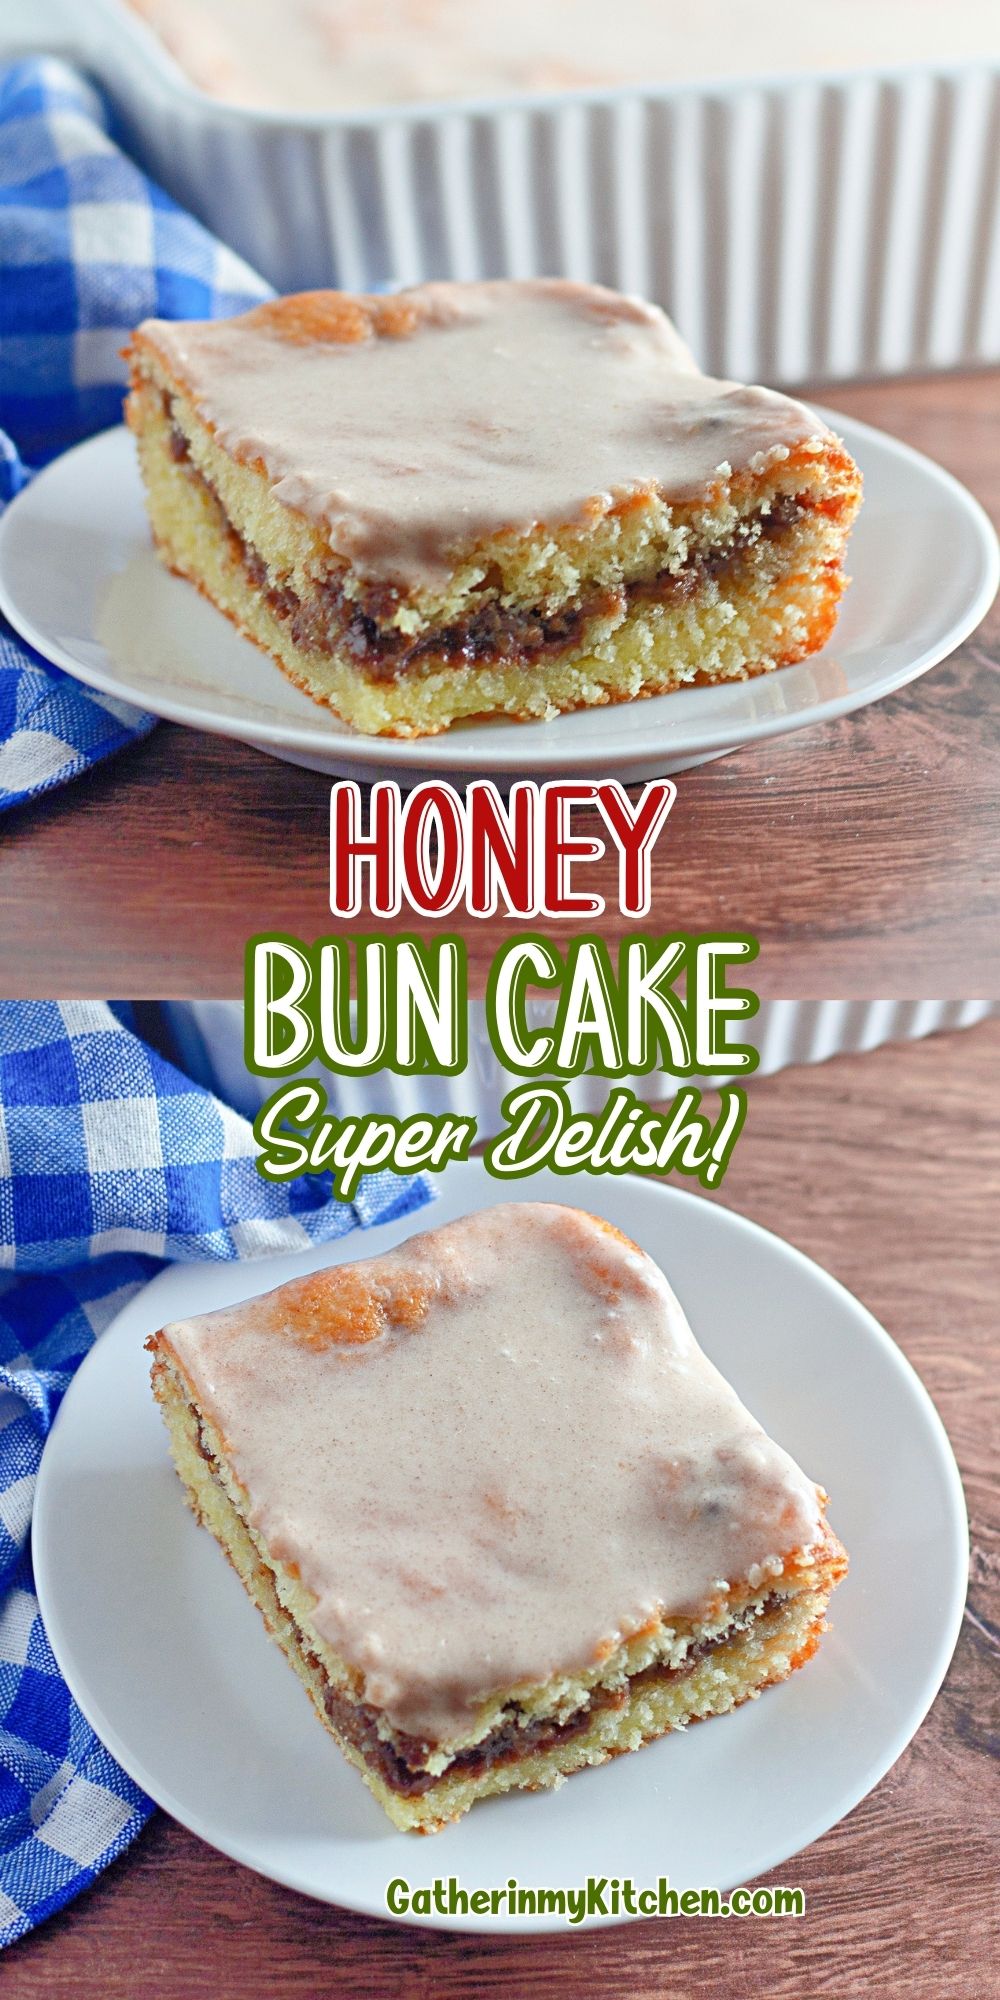 Pin image: top and bottom pics of honey bun cake on a plate and middle says "Honey Bun Cake: Super Delish".